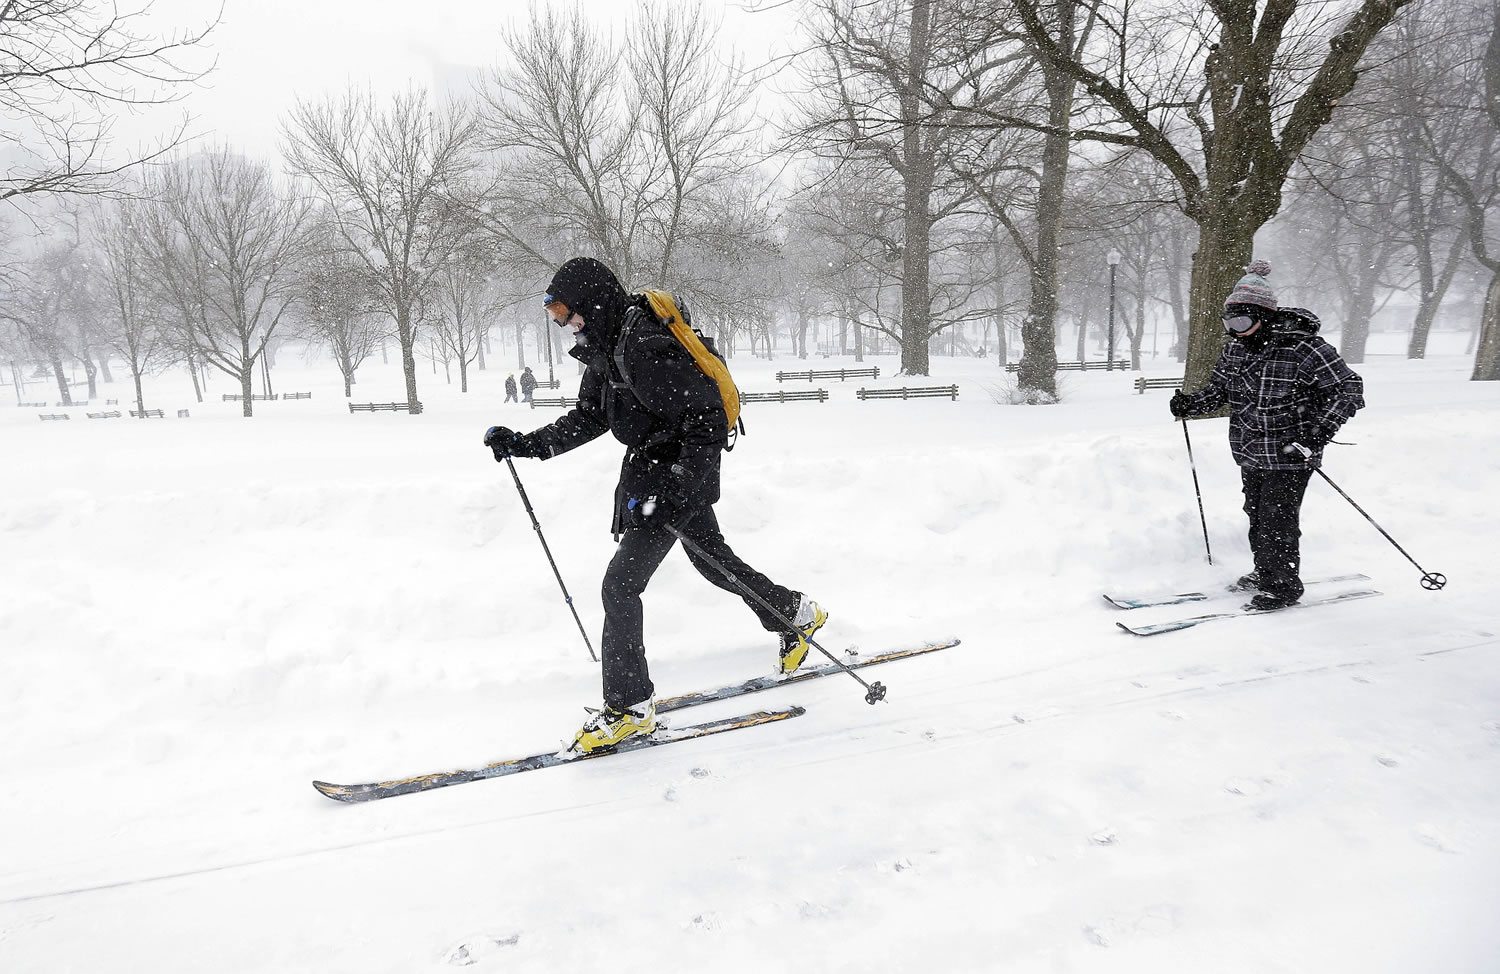 Cross-country skiers travels through the snow during a winter snowstorm Tuesday in Boston.